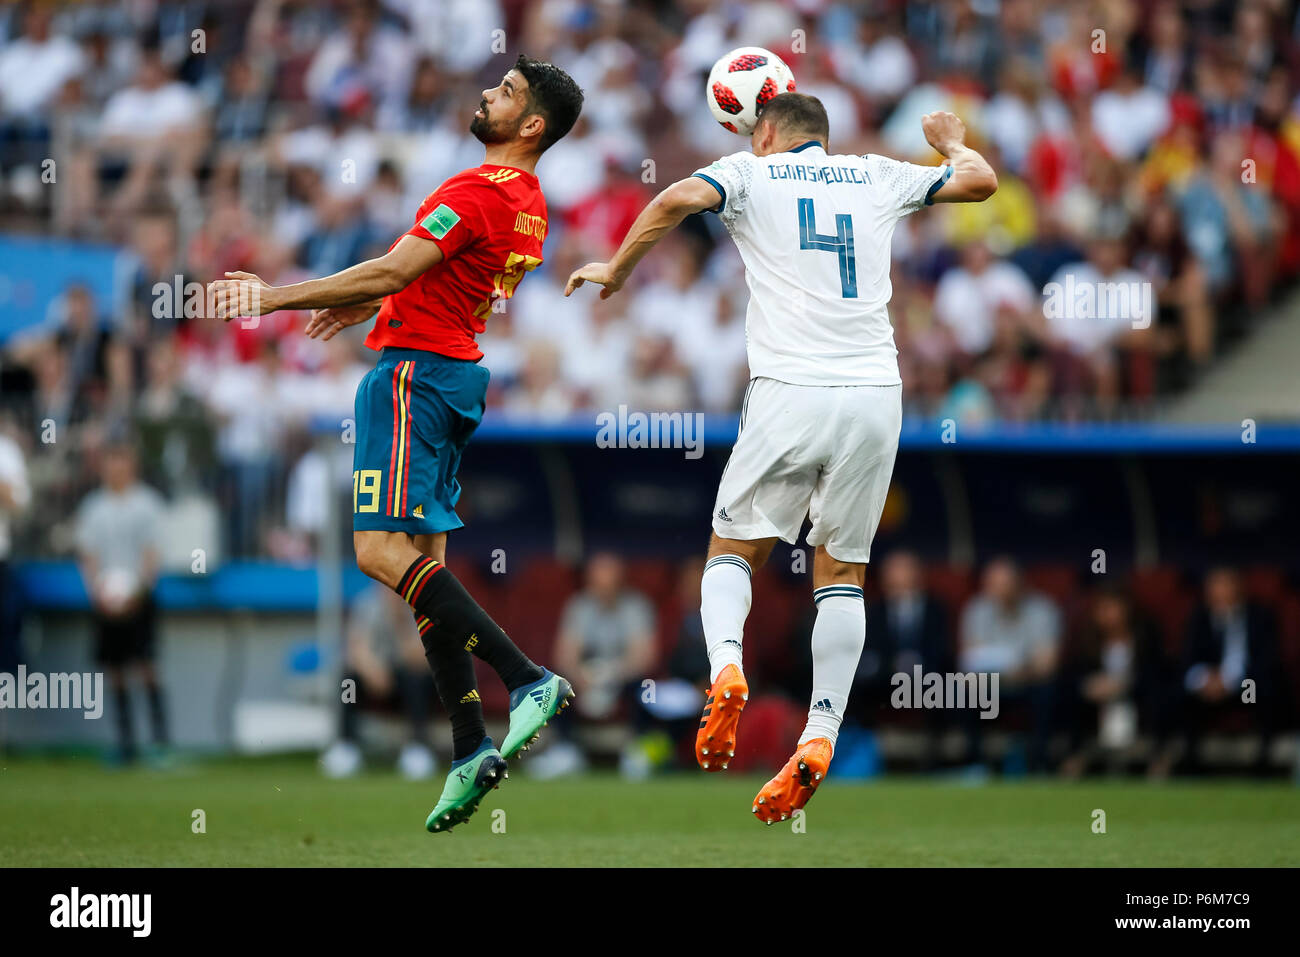 Moscow, Russia. 1st July, 2018. Moscow, Russia. 1st Jul, 2018. Diego Costa of Spain and Sergey Ignashevich of Russia during the 2018 FIFA World Cup Round of 16 match between Spain and Russia at Luzhniki Stadium on July 1st 2018 in Moscow, Russia.  Credit: PHC Images/Alamy Live News Credit: PHC Images/Alamy Live News Stock Photo